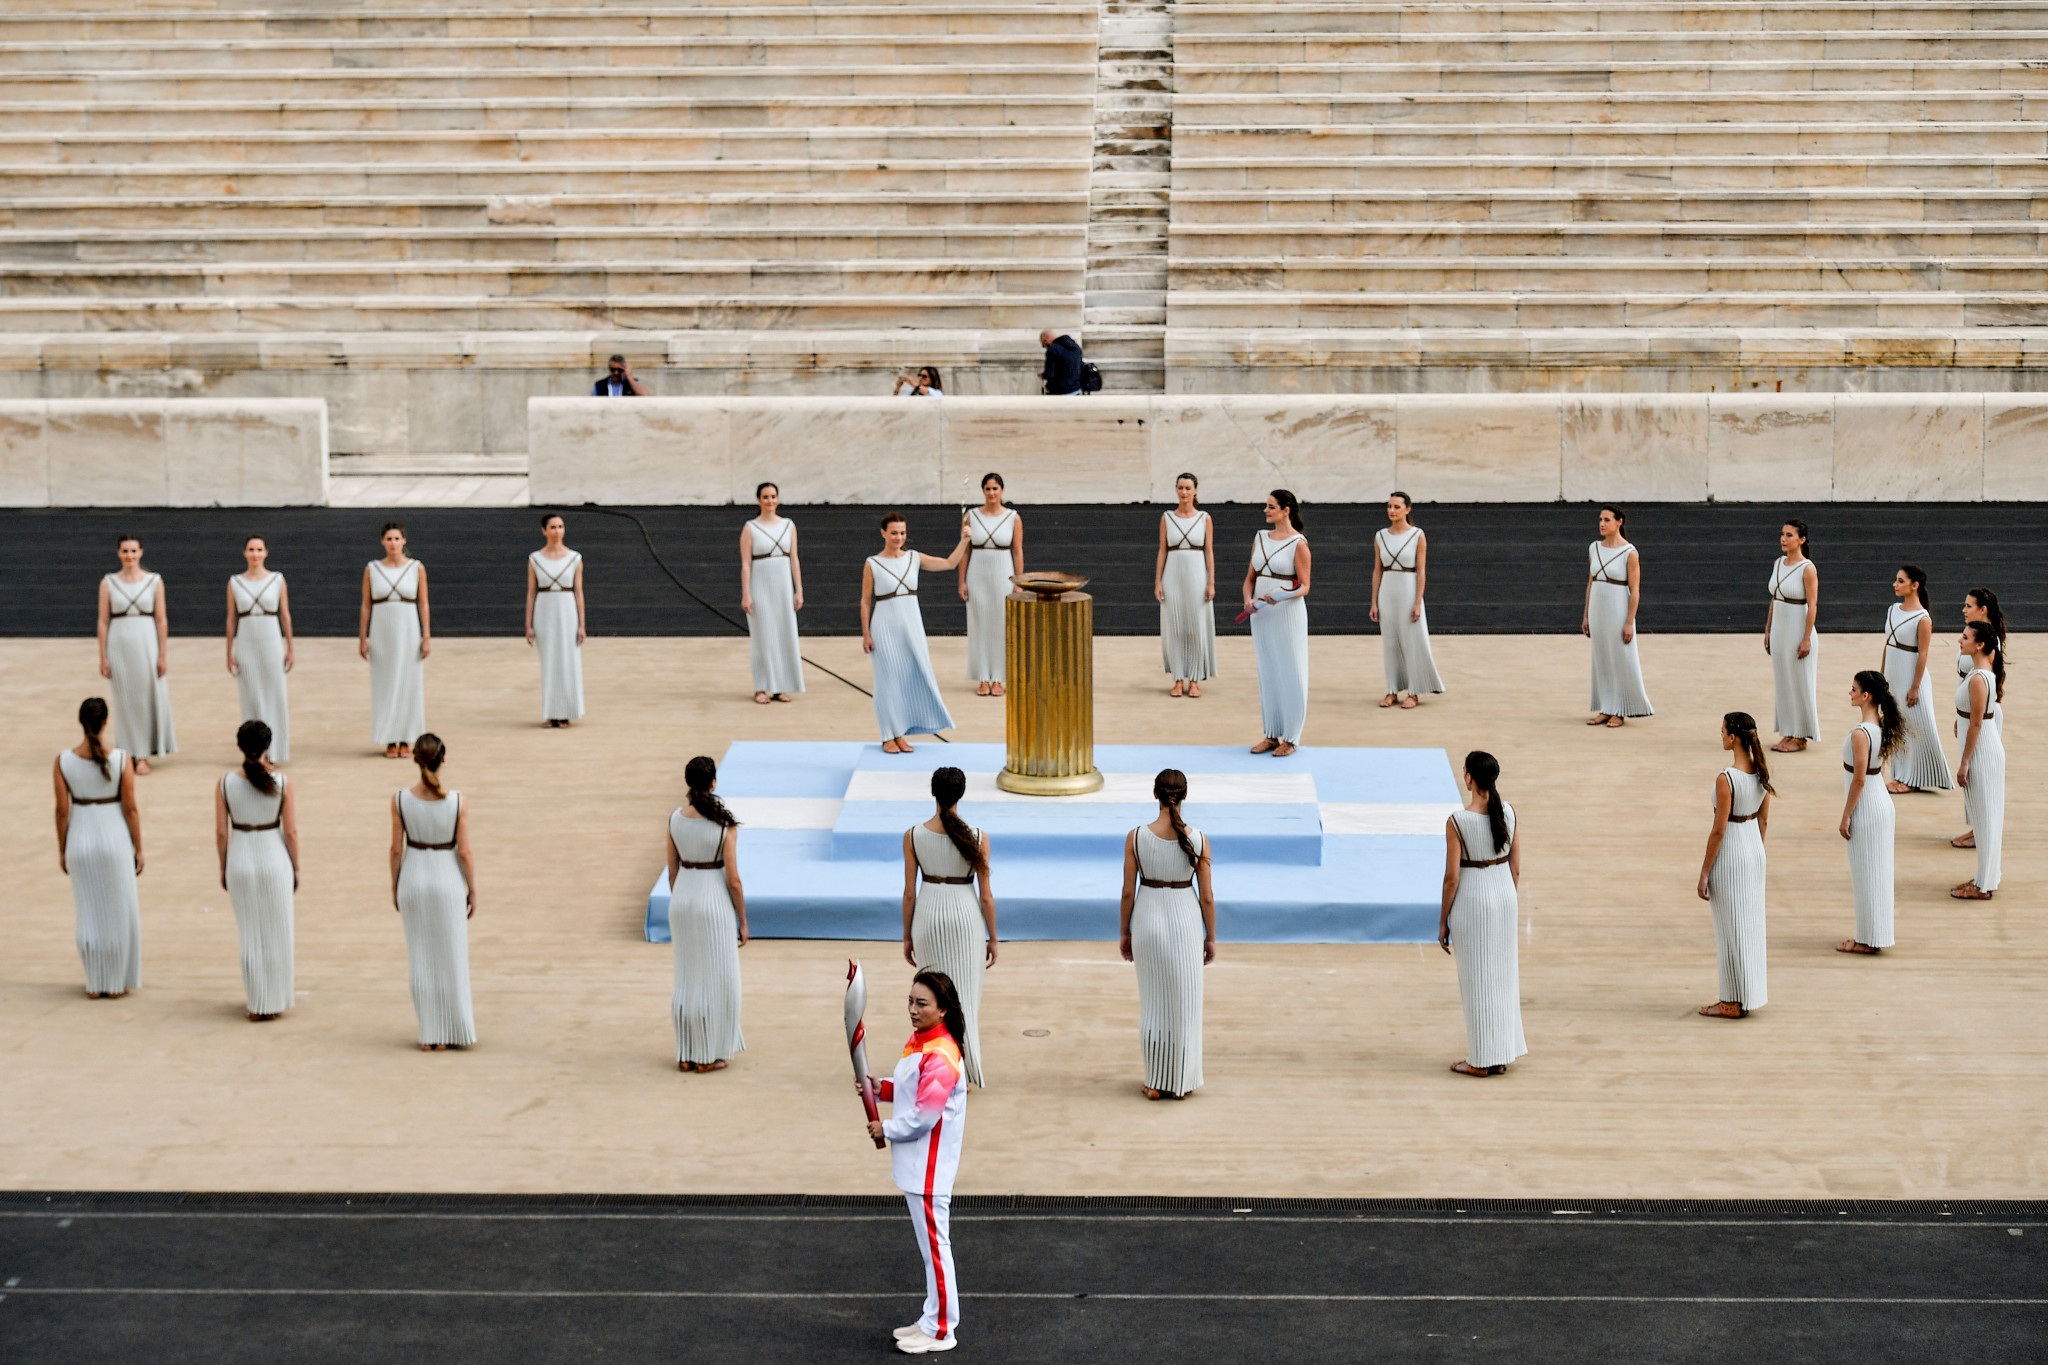 Li Nina holds the Olympic Torch in the Panathenaic Stadium during the Olympic Flame Handover Ceremony ©Getty Images 